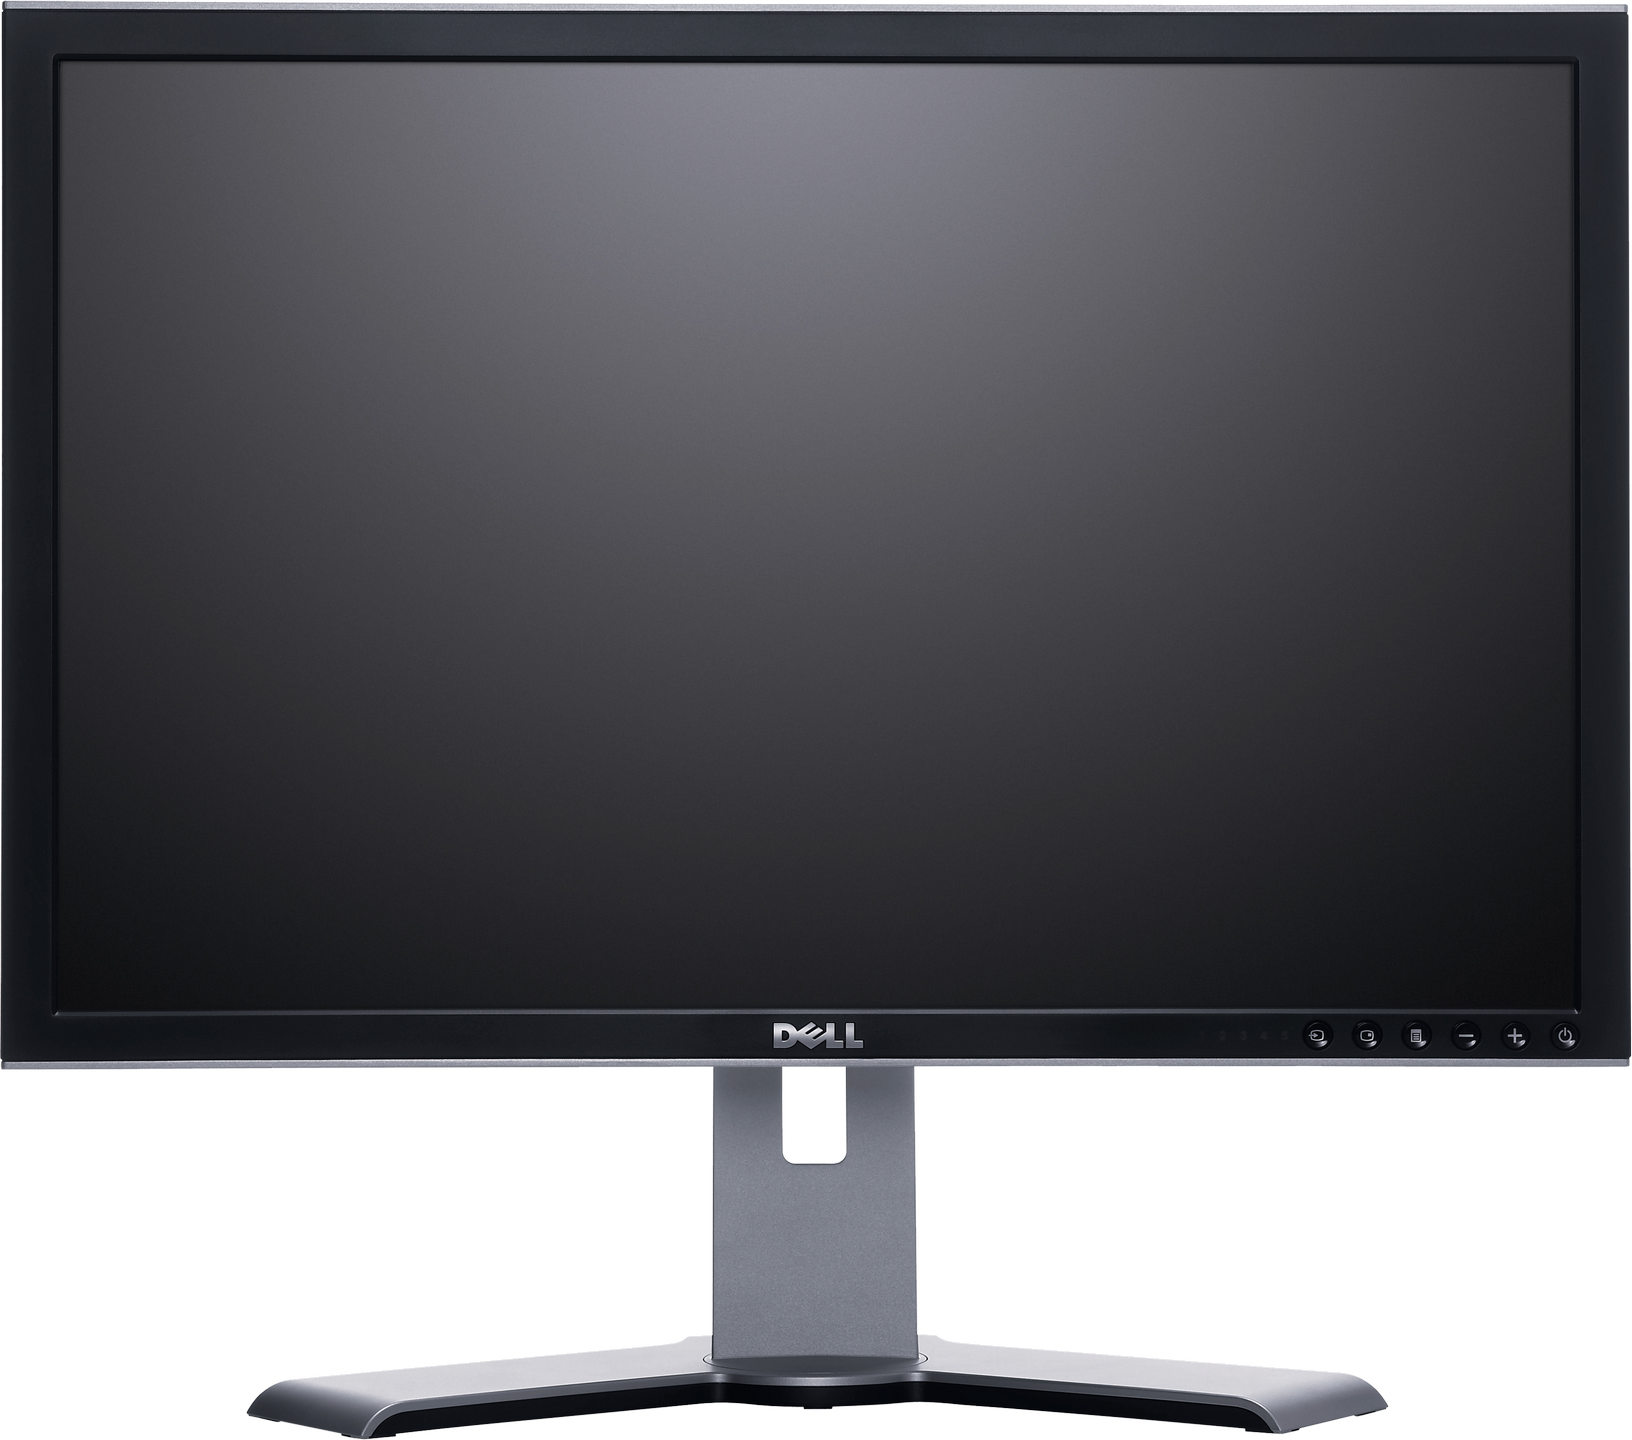 Dell Monitor PNG Image